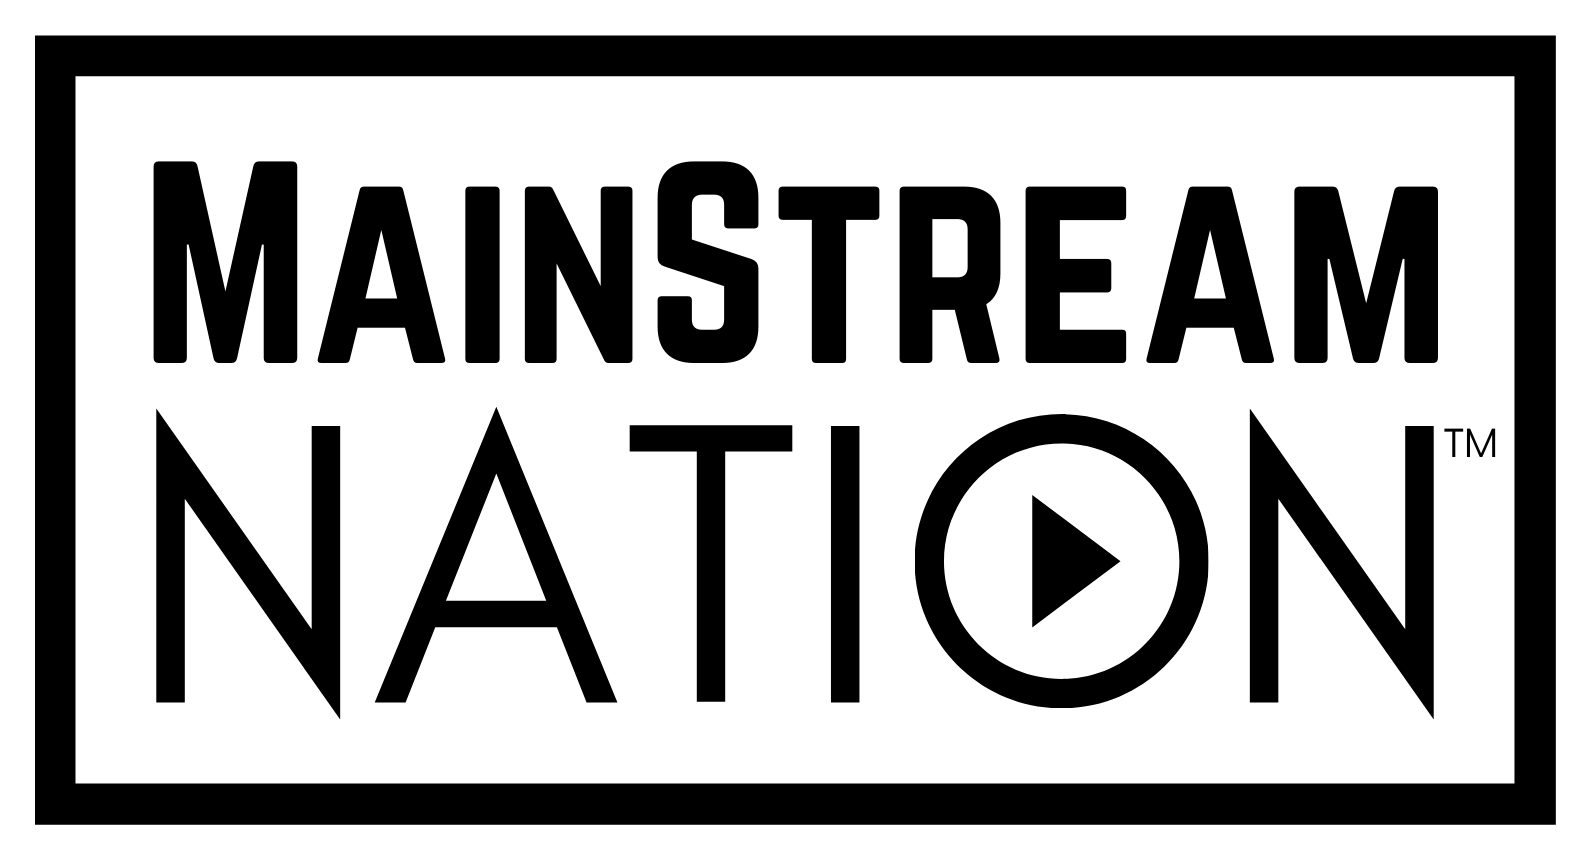 MainStream_Nation_Logo_TM_cropped.png